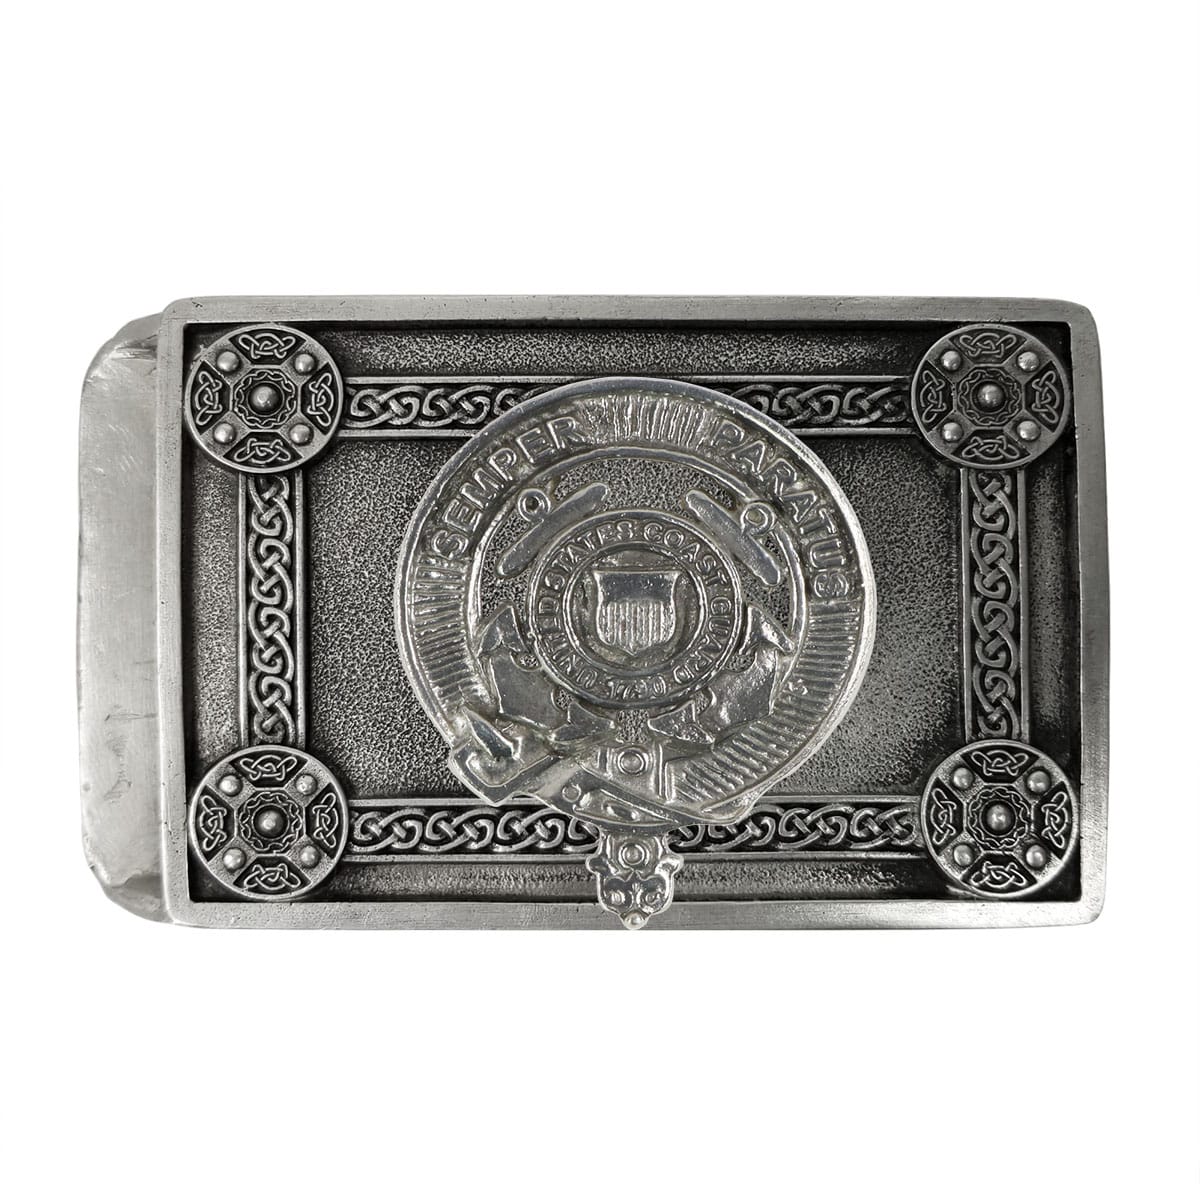 The **U.S. Army Pewter Kilt Belt Buckle** is a rectangular silver object with intricate designs and a circular emblem at the center that reads "Semper Paratus" around a shield with stars and a key. It features four decorative round elements at the corners.